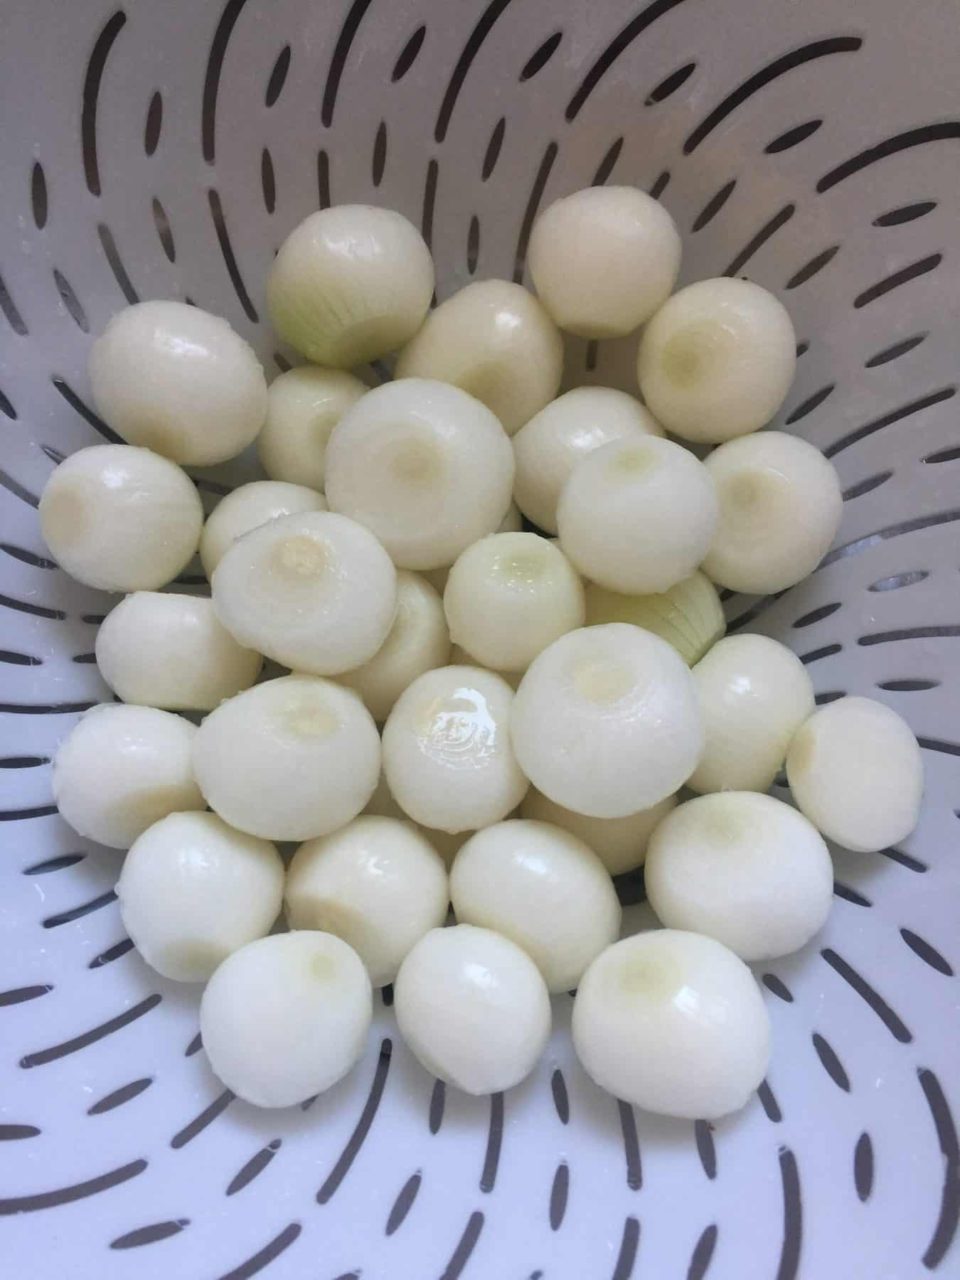 Picture of cleaned and peeled onions in a colander.